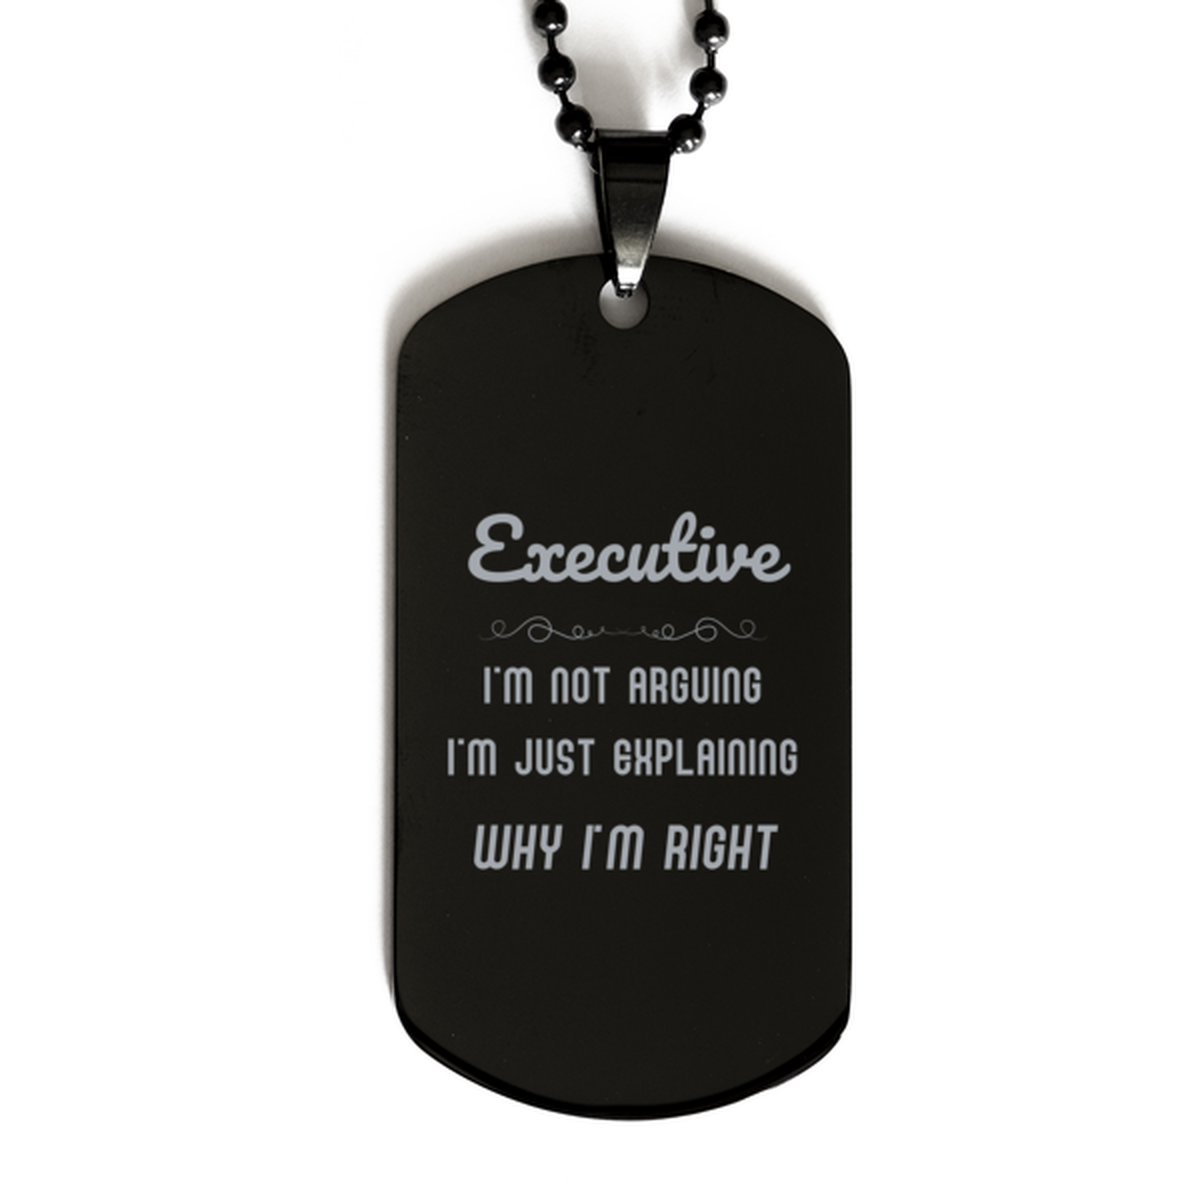 Executive I'm not Arguing. I'm Just Explaining Why I'm RIGHT Black Dog Tag, Funny Saying Quote Executive Gifts For Executive Graduation Birthday Christmas Gifts for Men Women Coworker